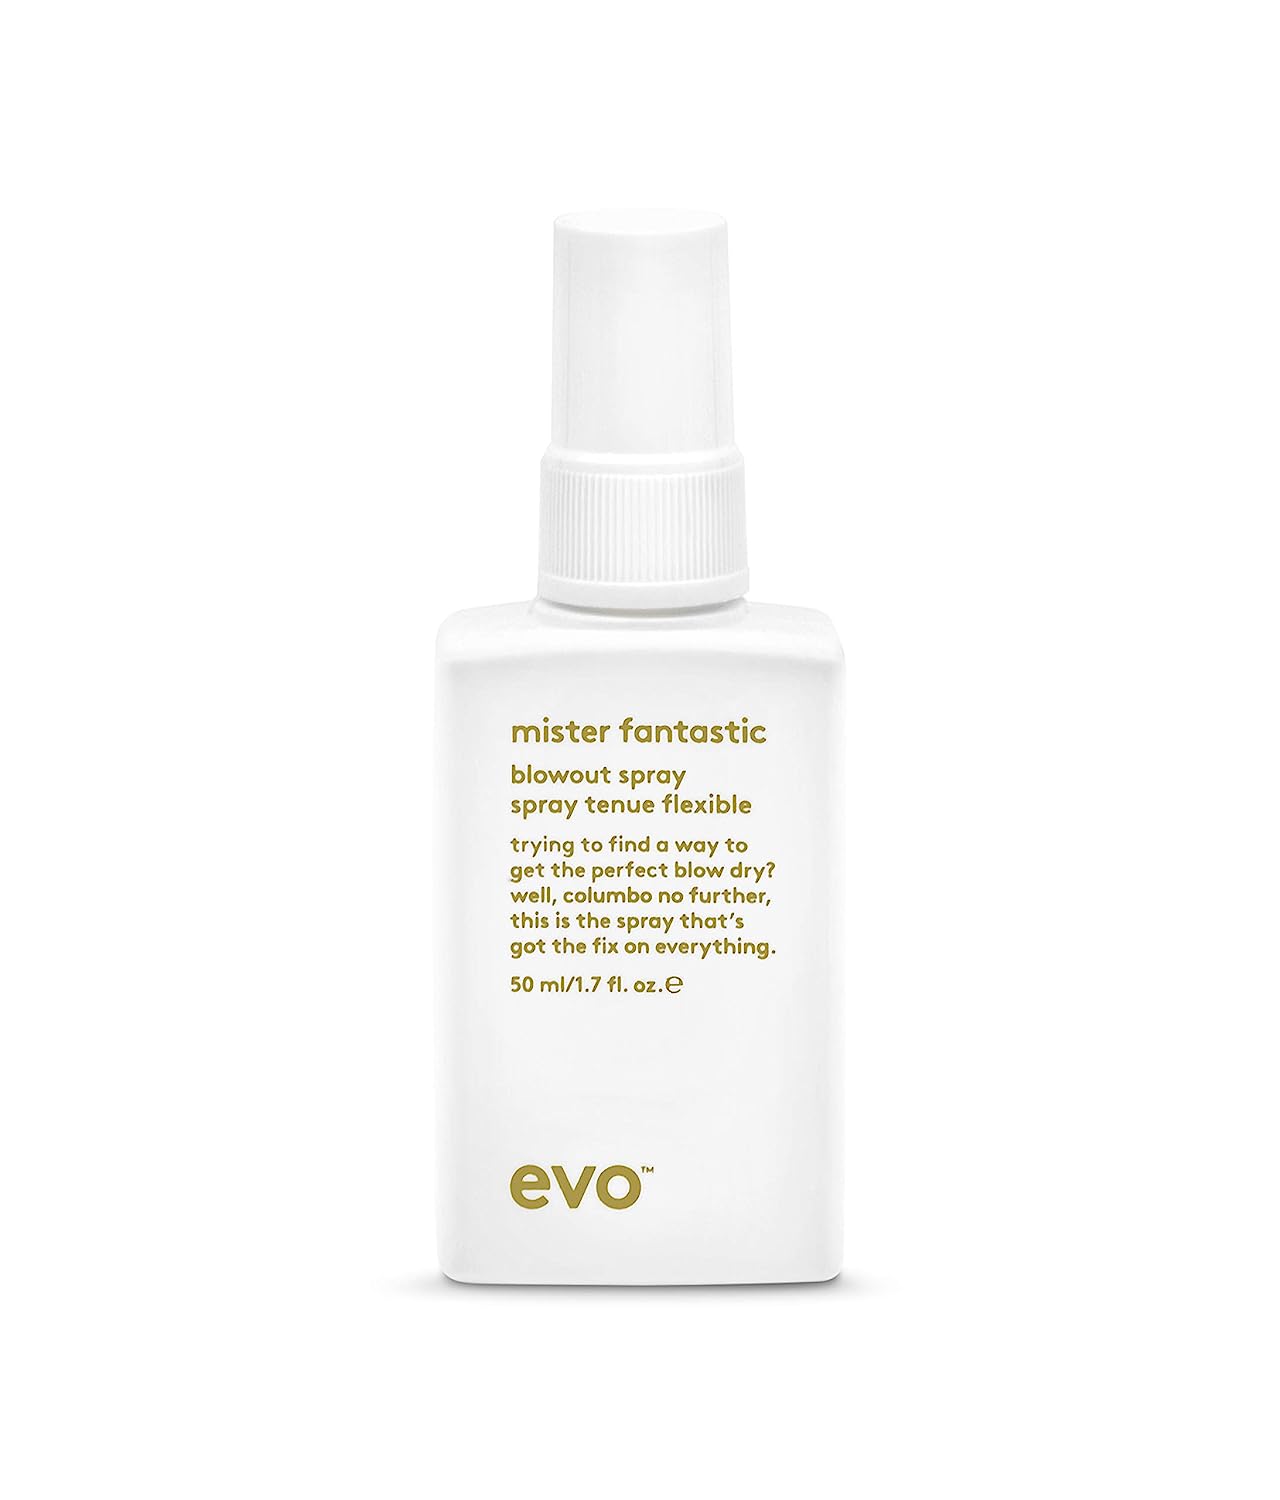 EVO Mister Fantastic Blowout Spray - Improves Style, [...]